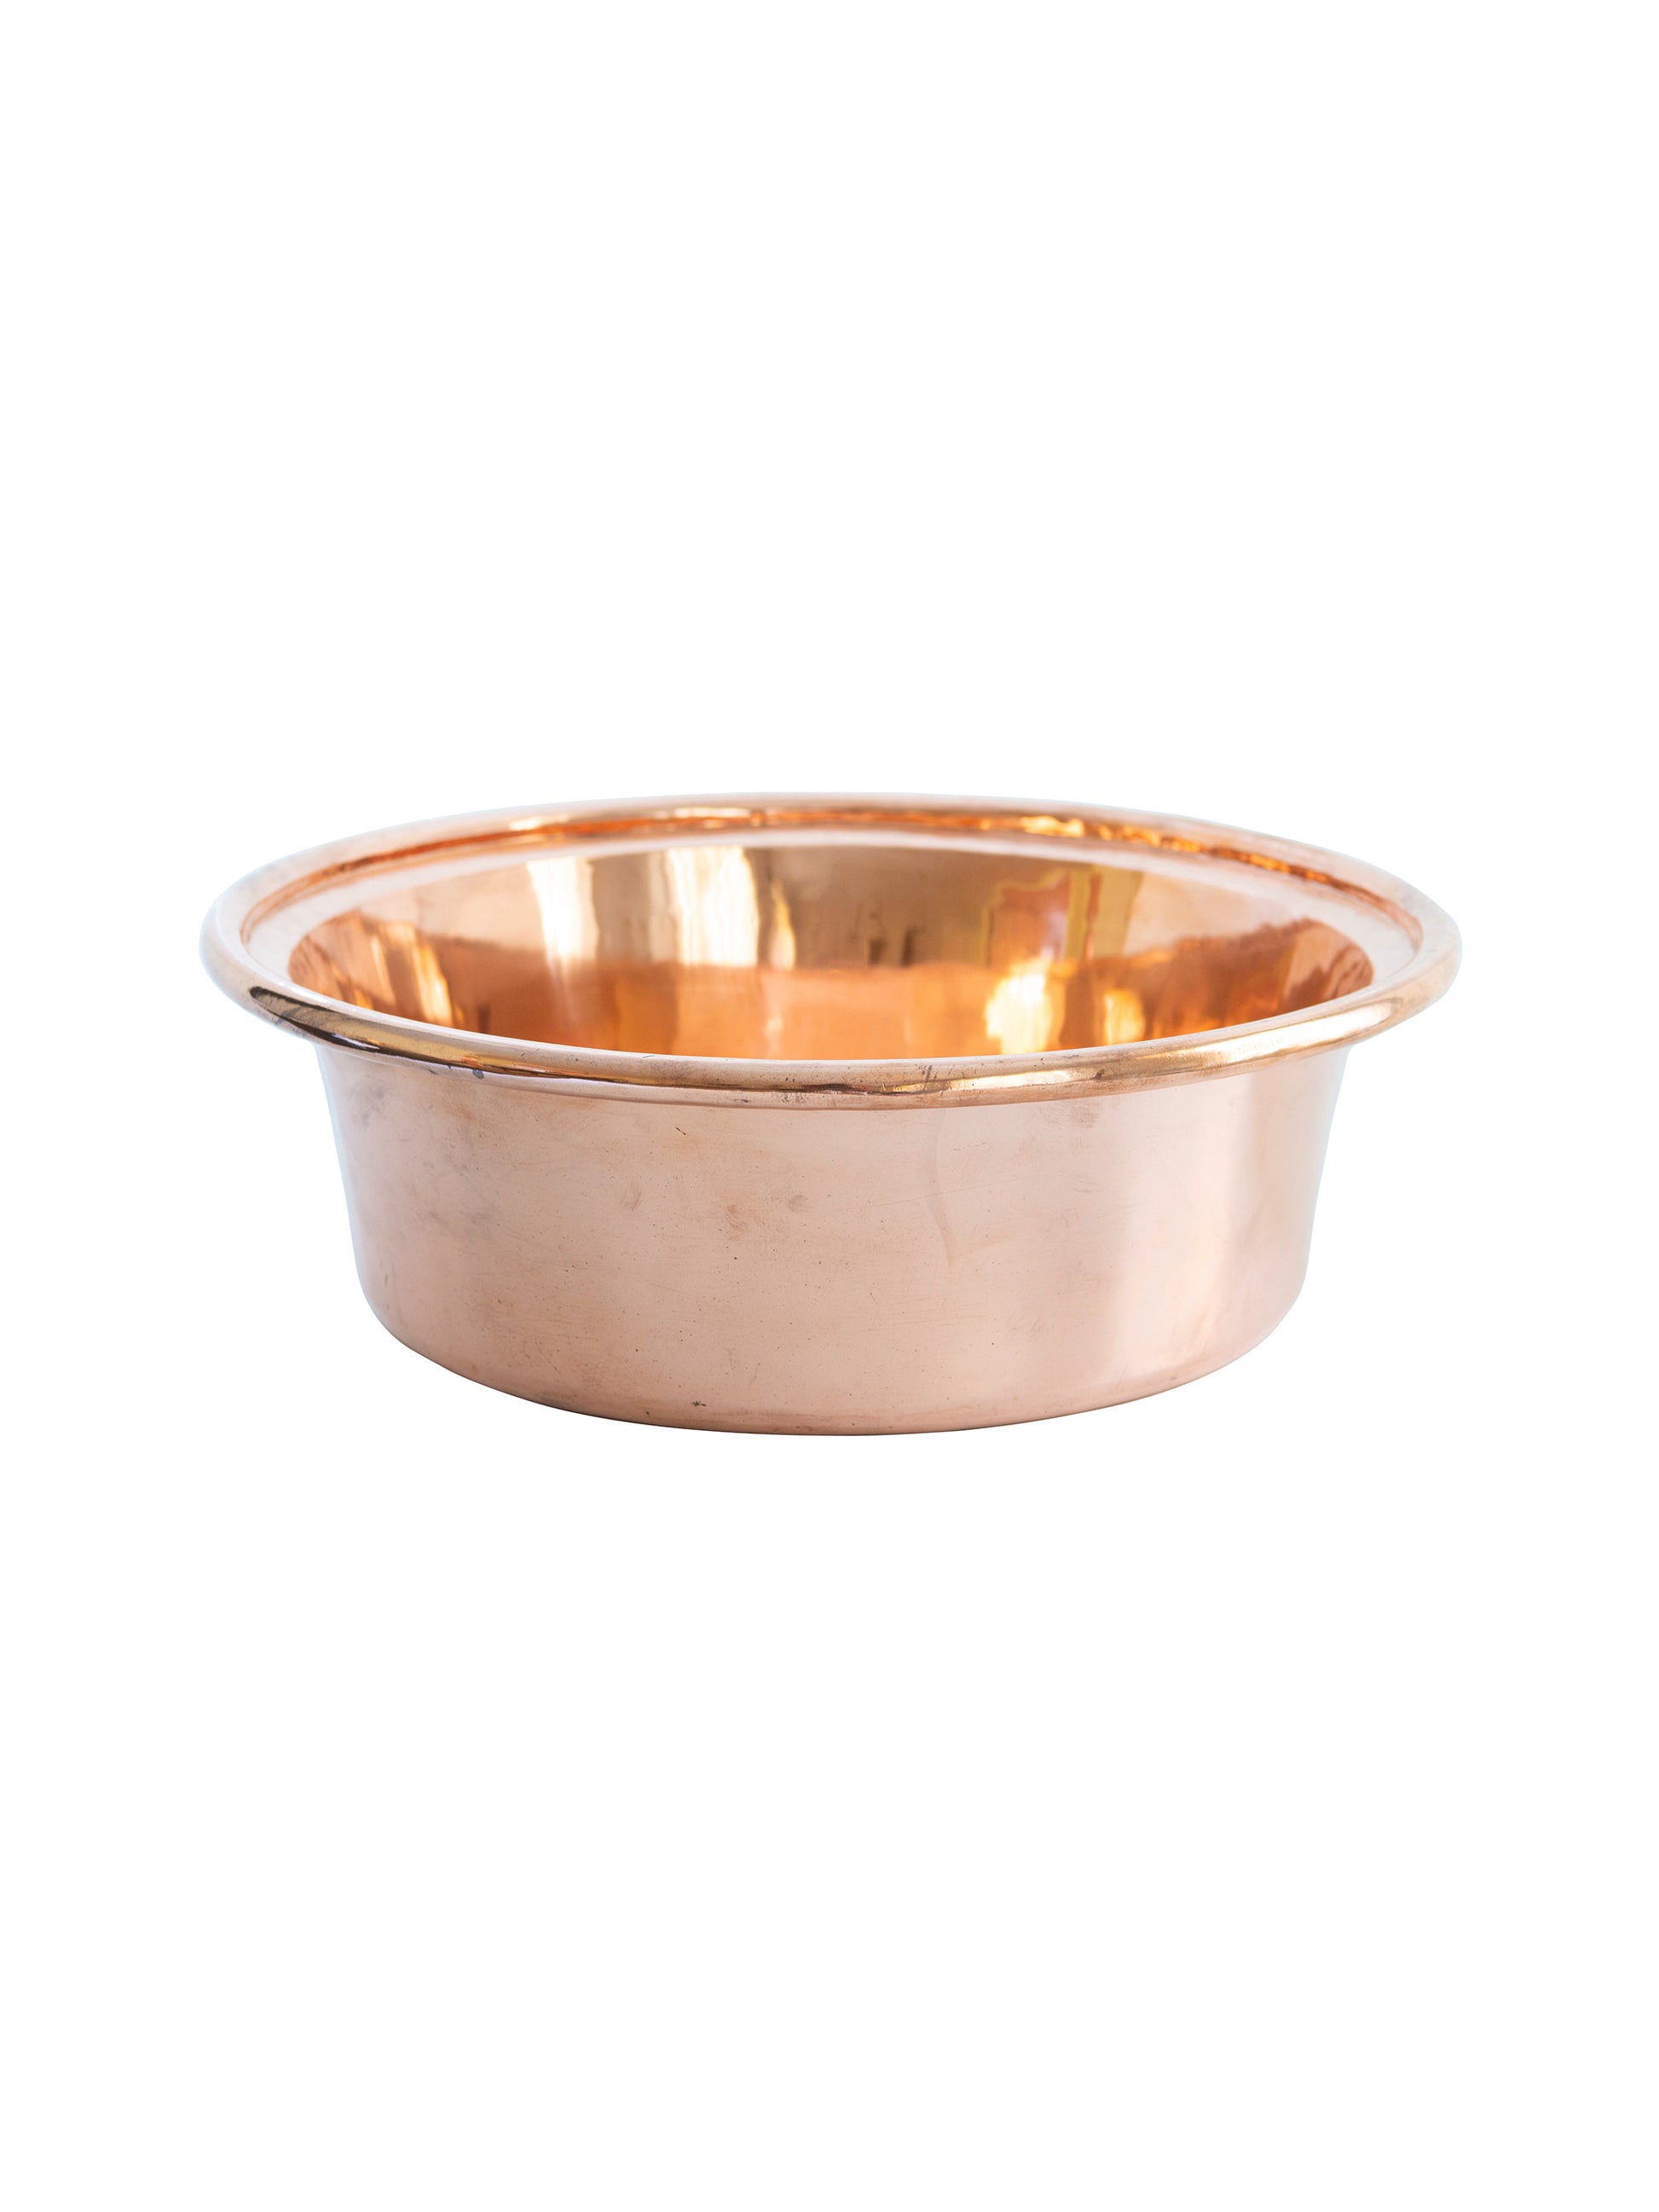 https://westontable.com/cdn/shop/products/1890-French-Copper-Preserving-Pan-Weston-Table.jpg?v=1592580501&width=1946